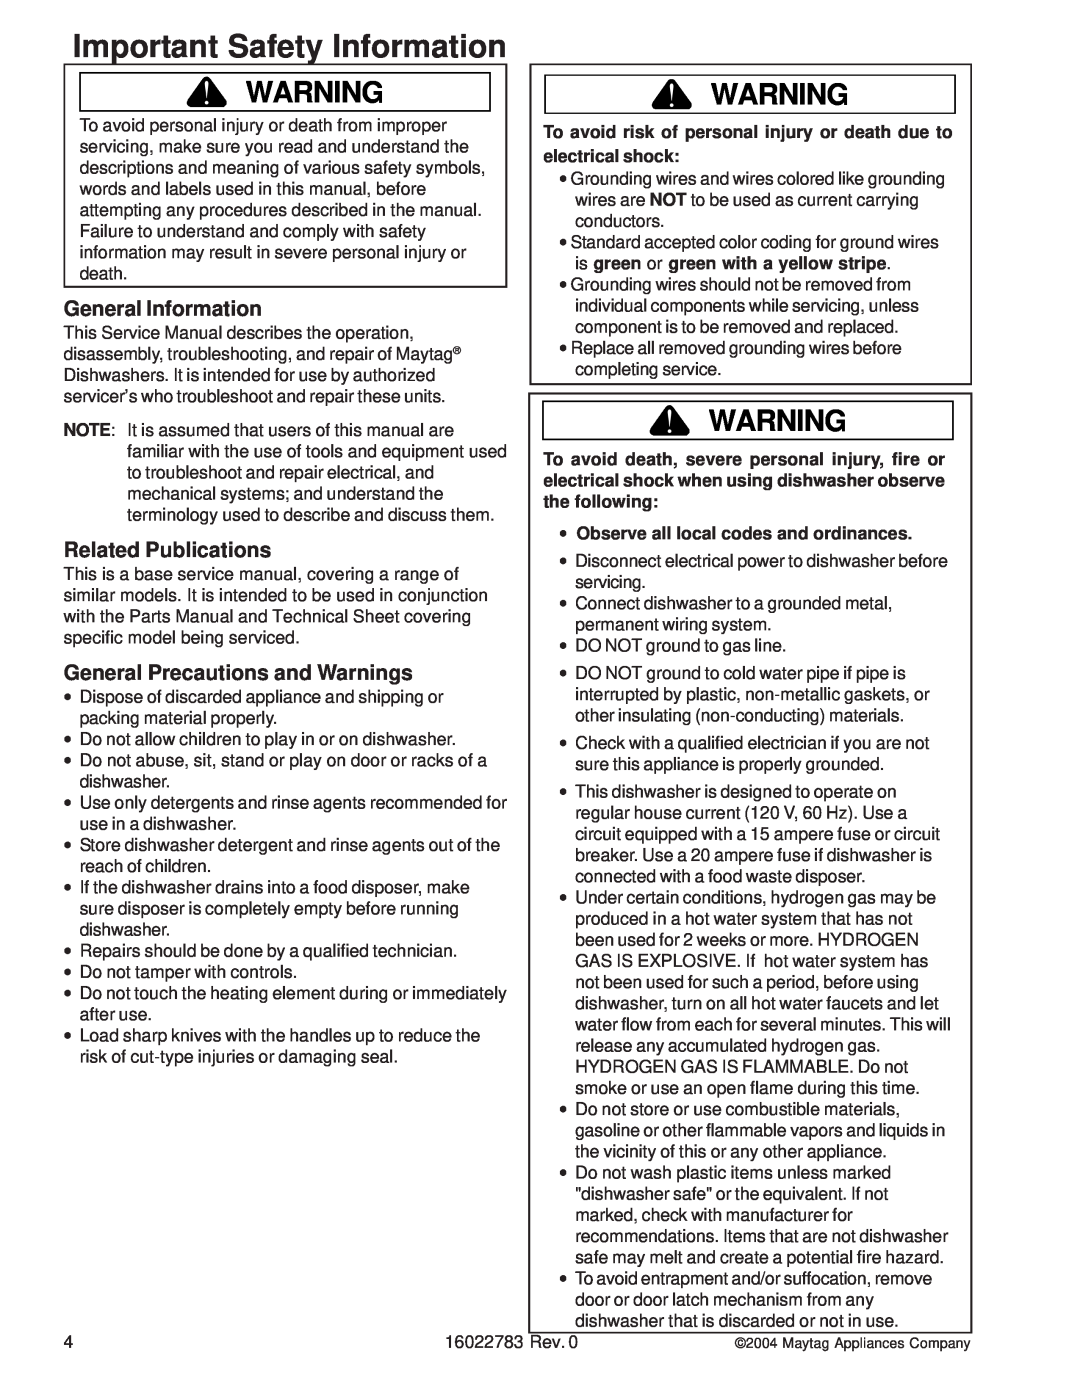 Maytag JDB1100AW Important Safety Information, General Information, Related Publications, General Precautions and Warnings 